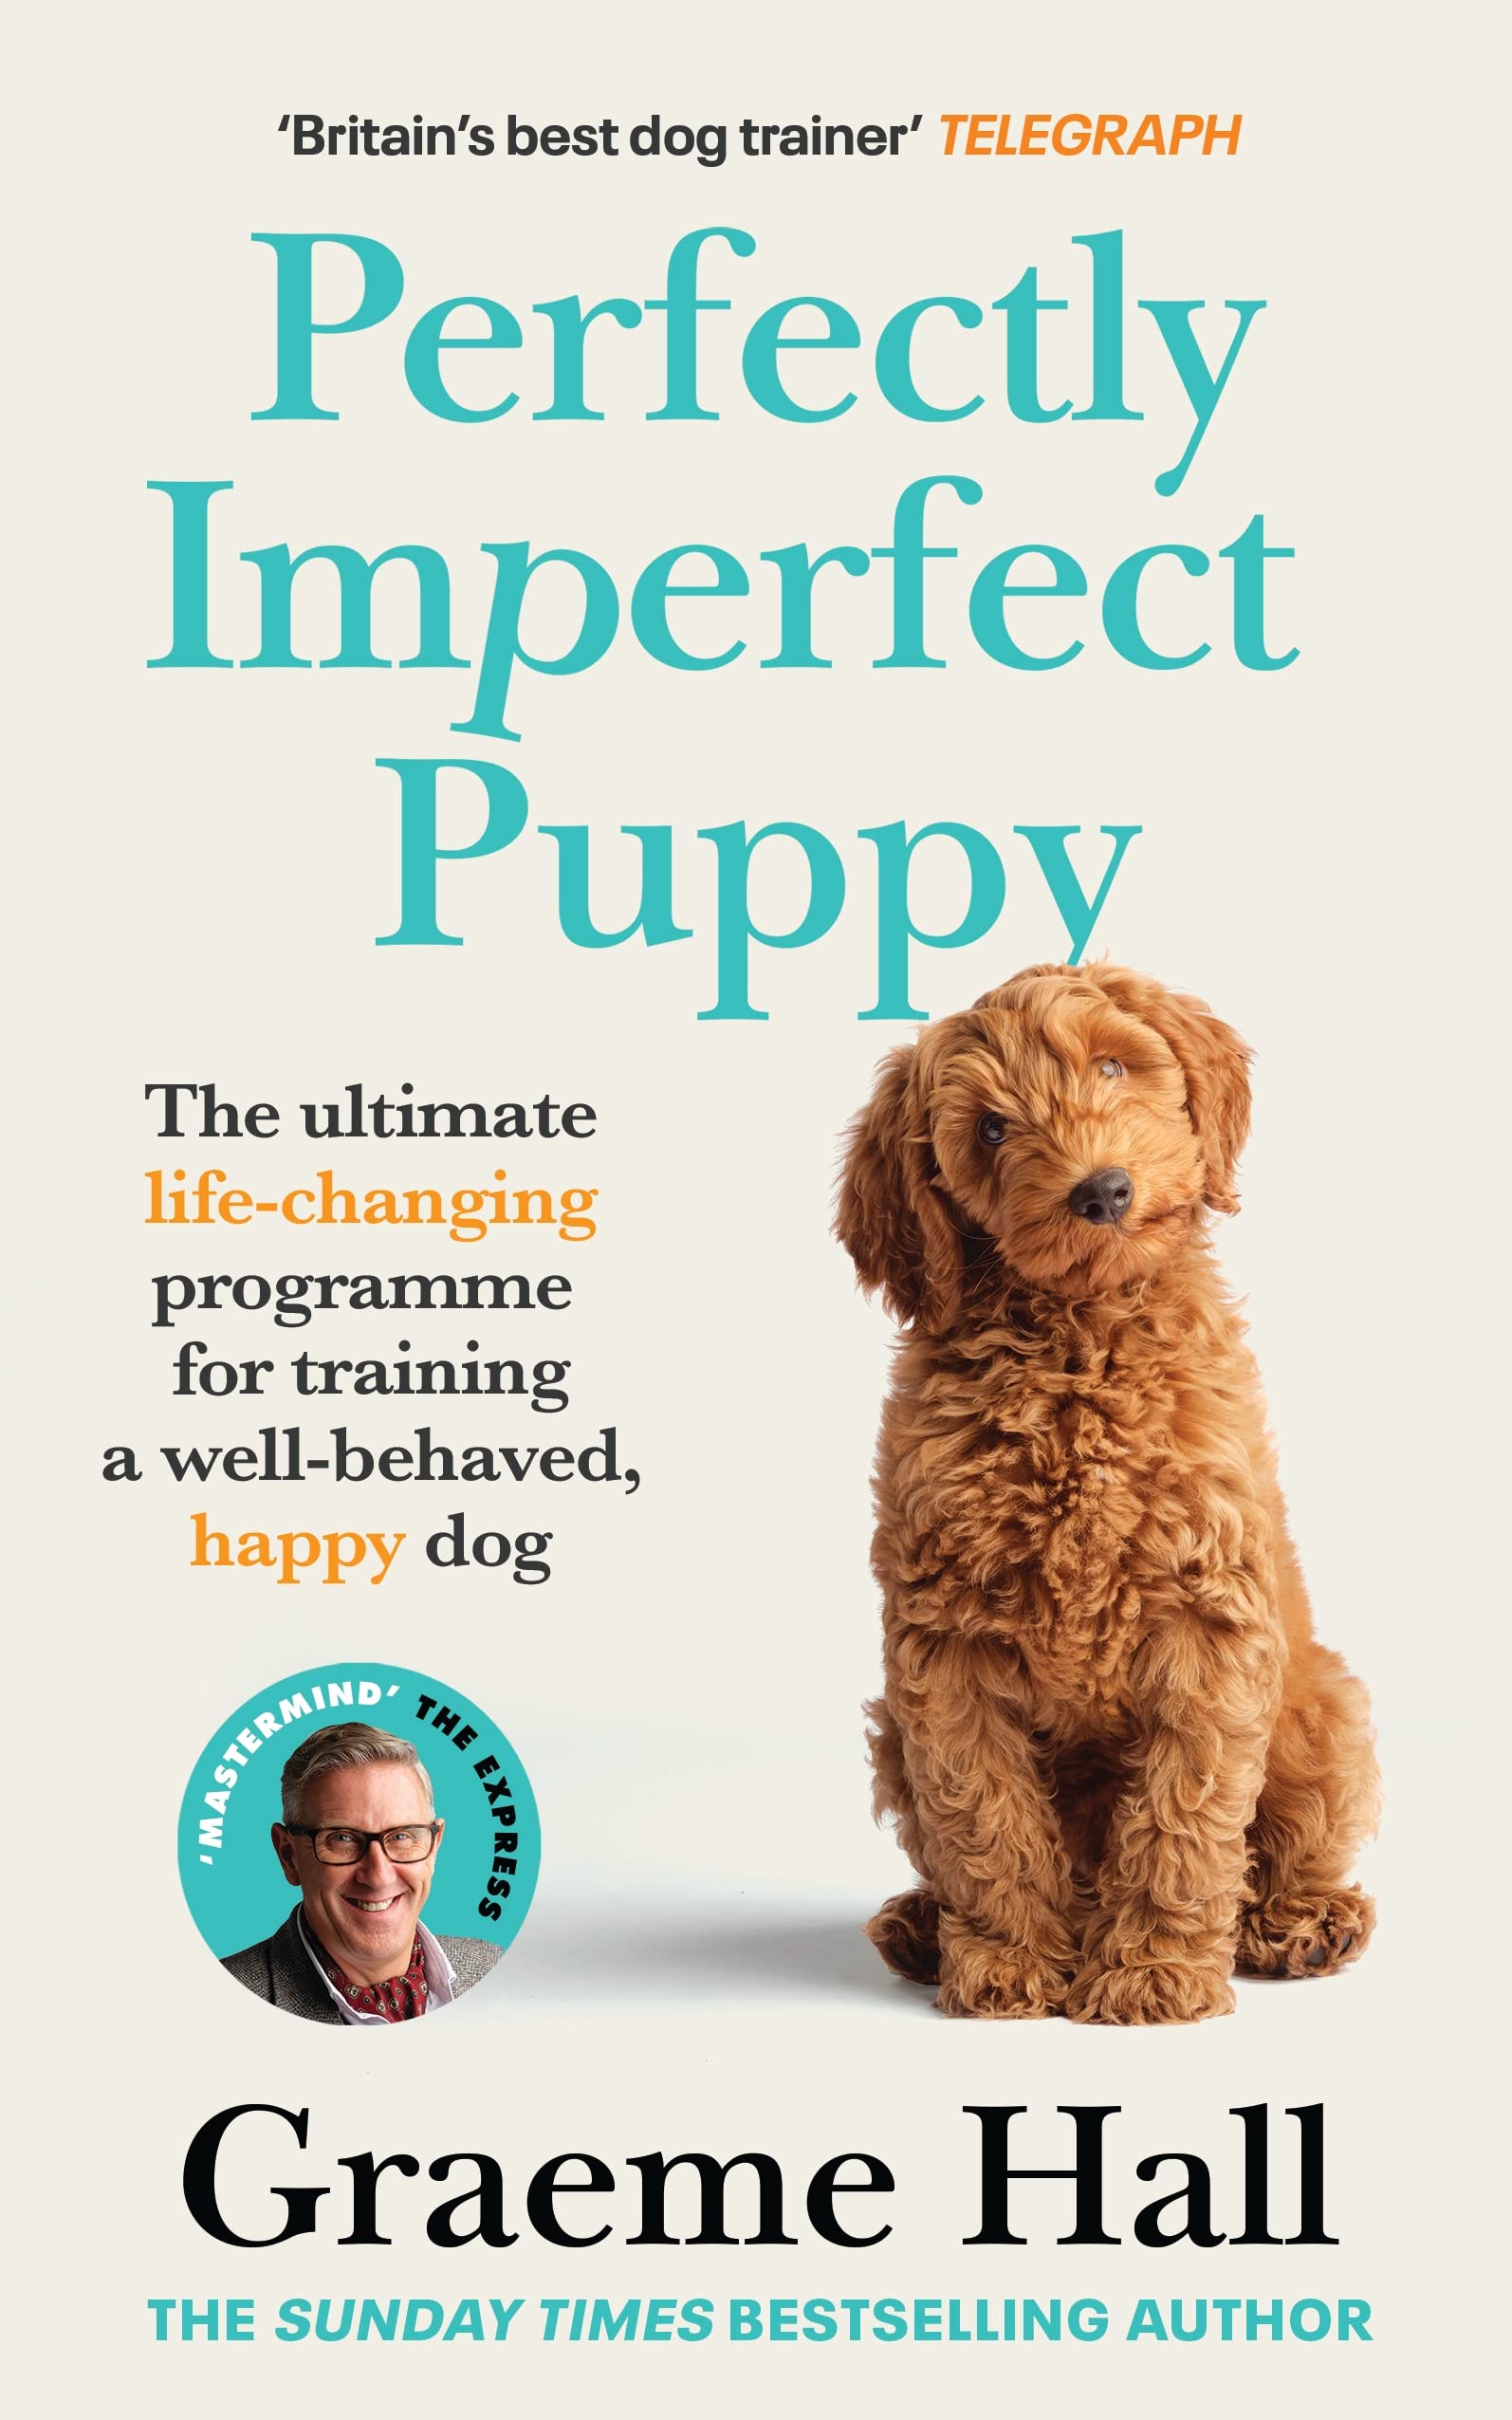 Perfectly-Imperfect-Puppy-The-ultimate-life-changing-programme-for-training-a.jpg